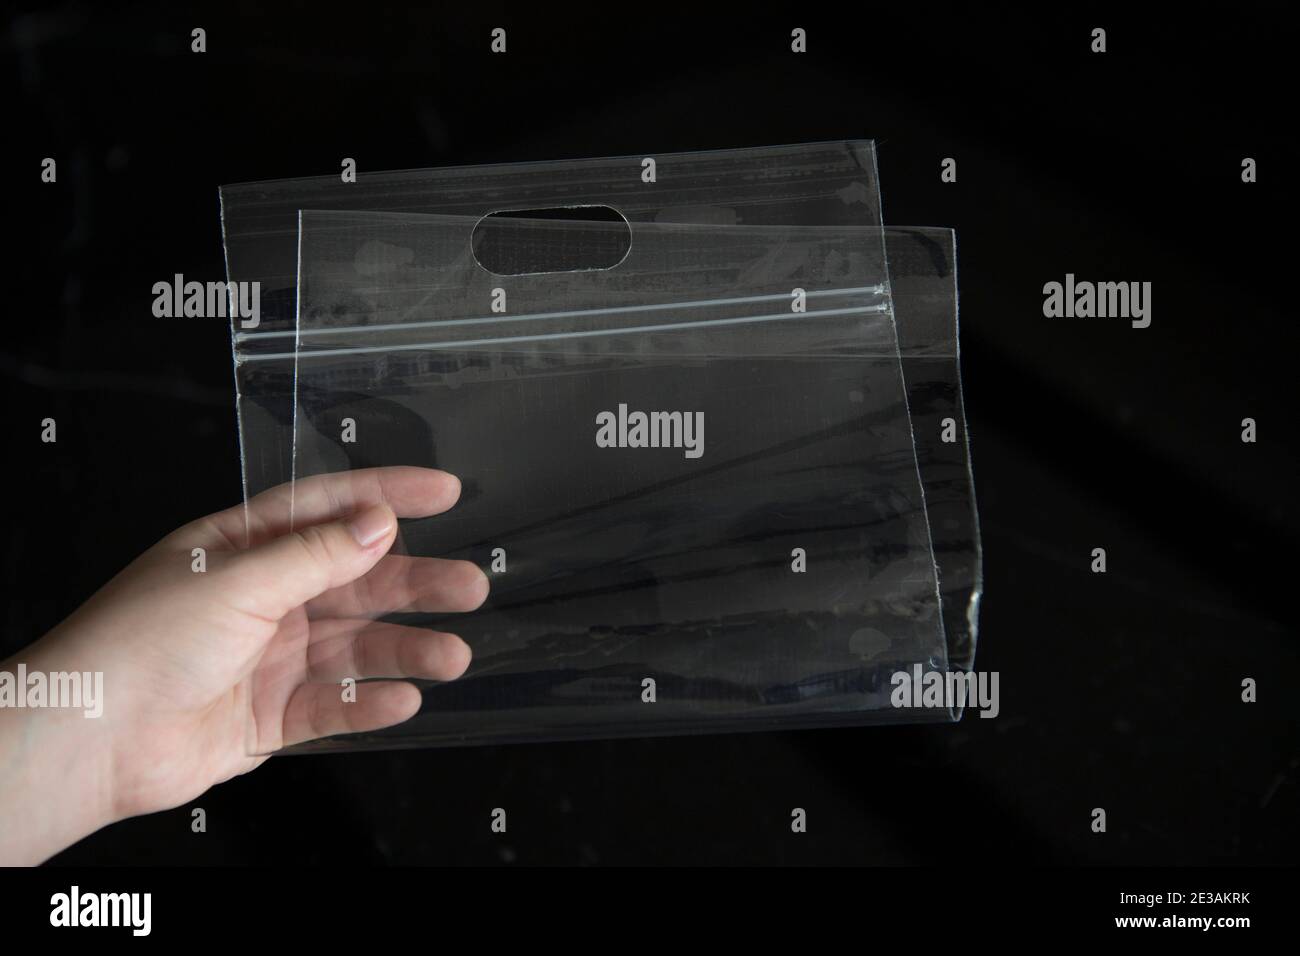 Ziploc bags hi-res stock photography and images - Alamy